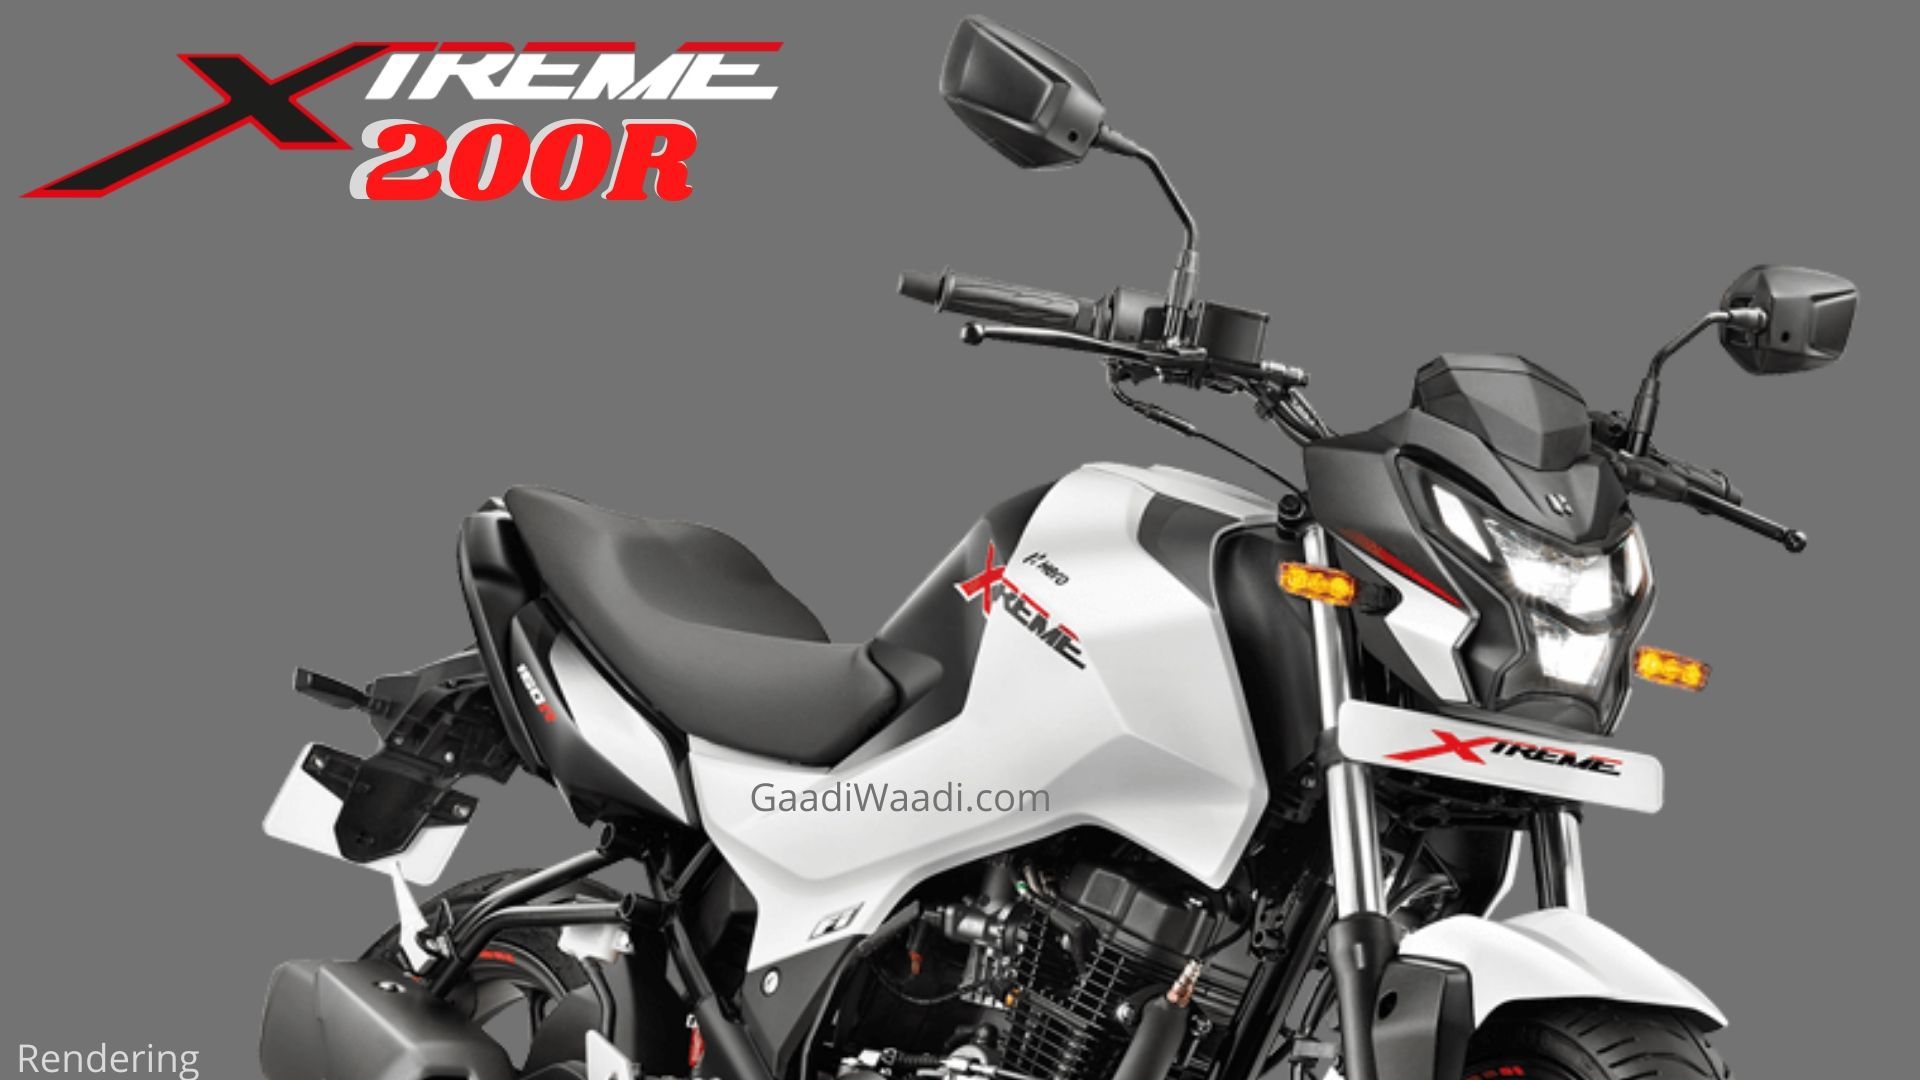 Hero Xtreme 200R (Pulsar NS200 Rival) Likely To Be Based On 160R